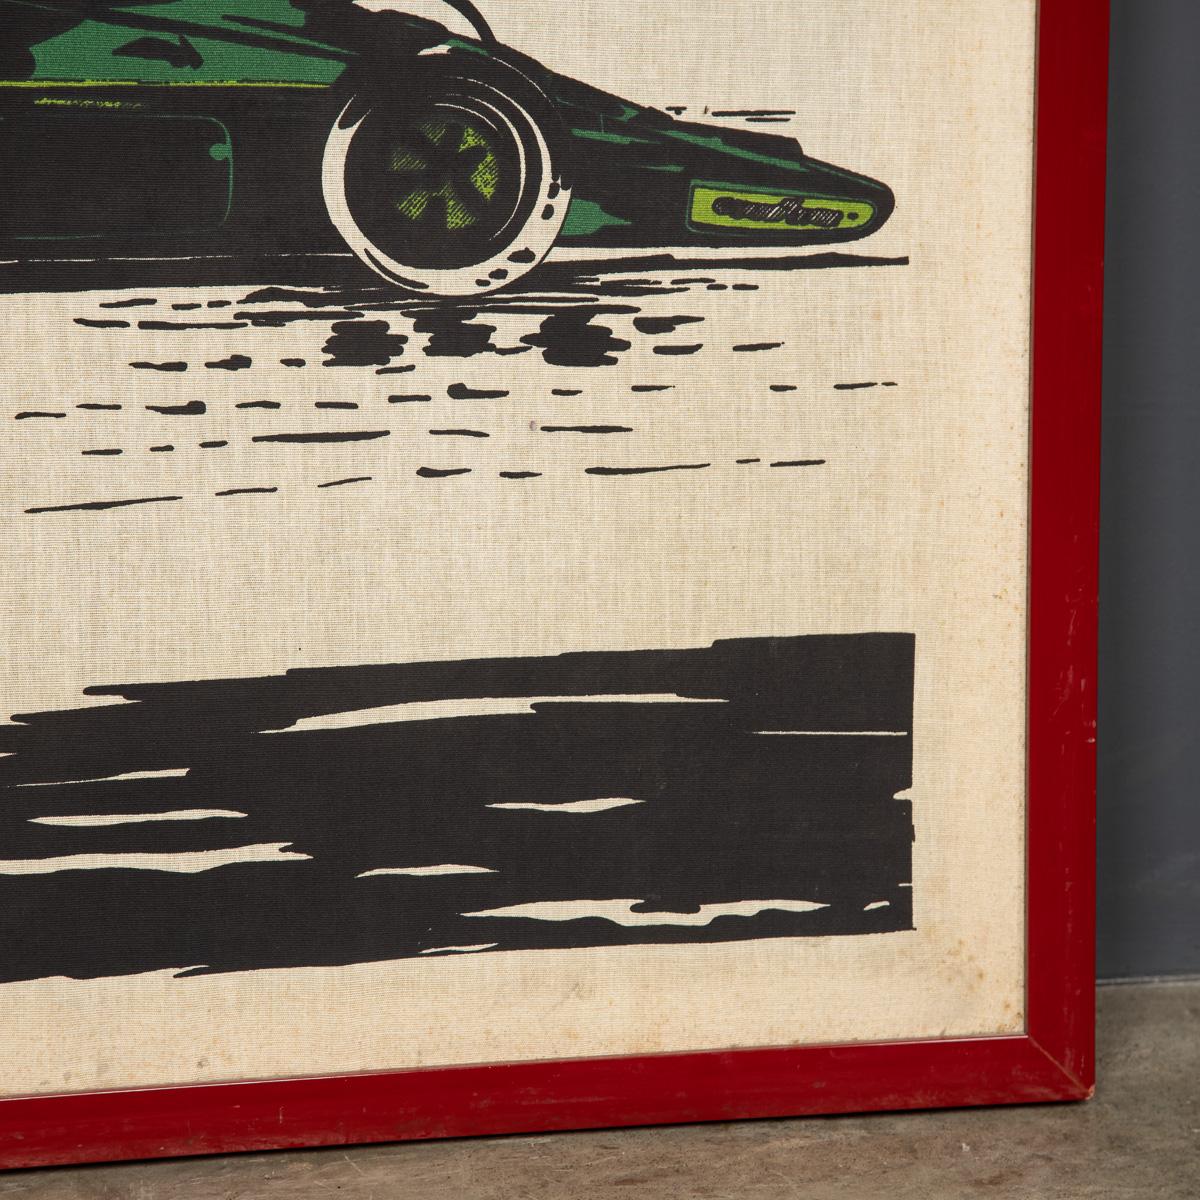 20th Century Silk Screen Print of Racing F1 Cars on Track Poster, c.1970 For Sale 11